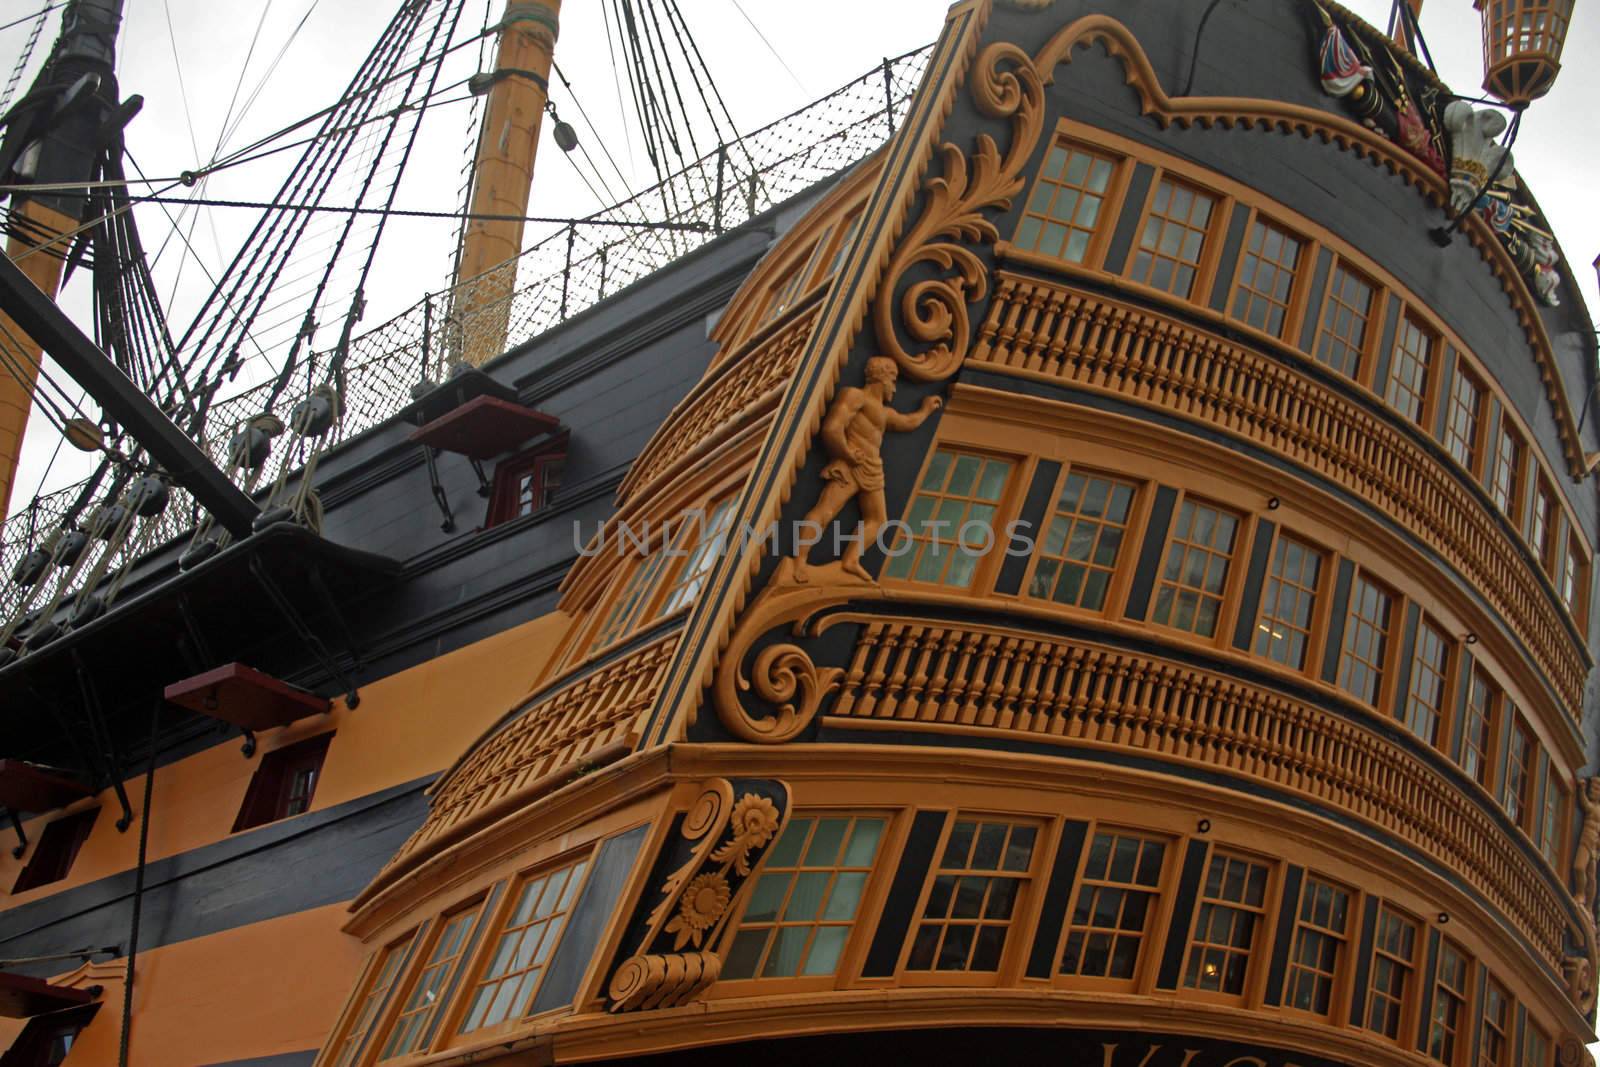 Close up view of rear of HMS Victory